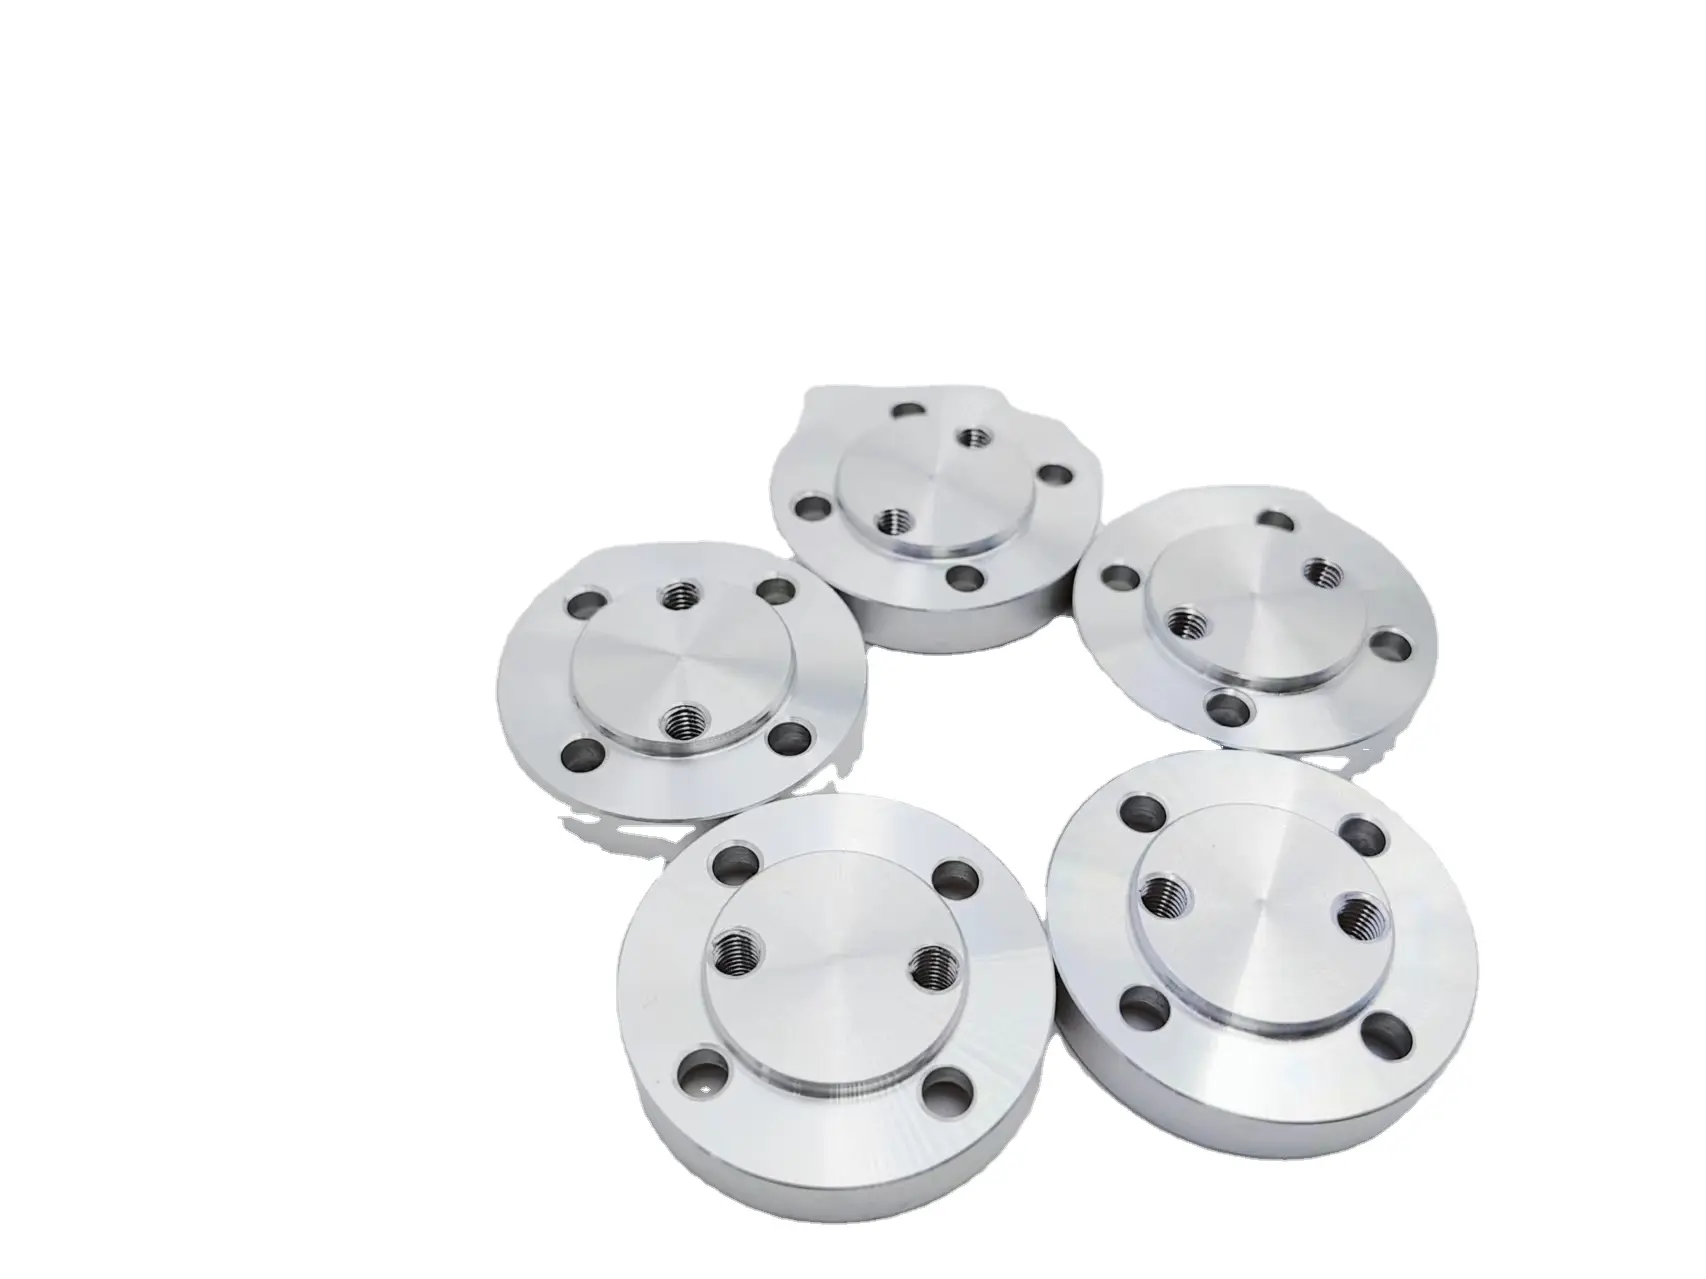 High-precision customized 5-axis CNC metal processing services stainless steel aluminum carbon alloy steel